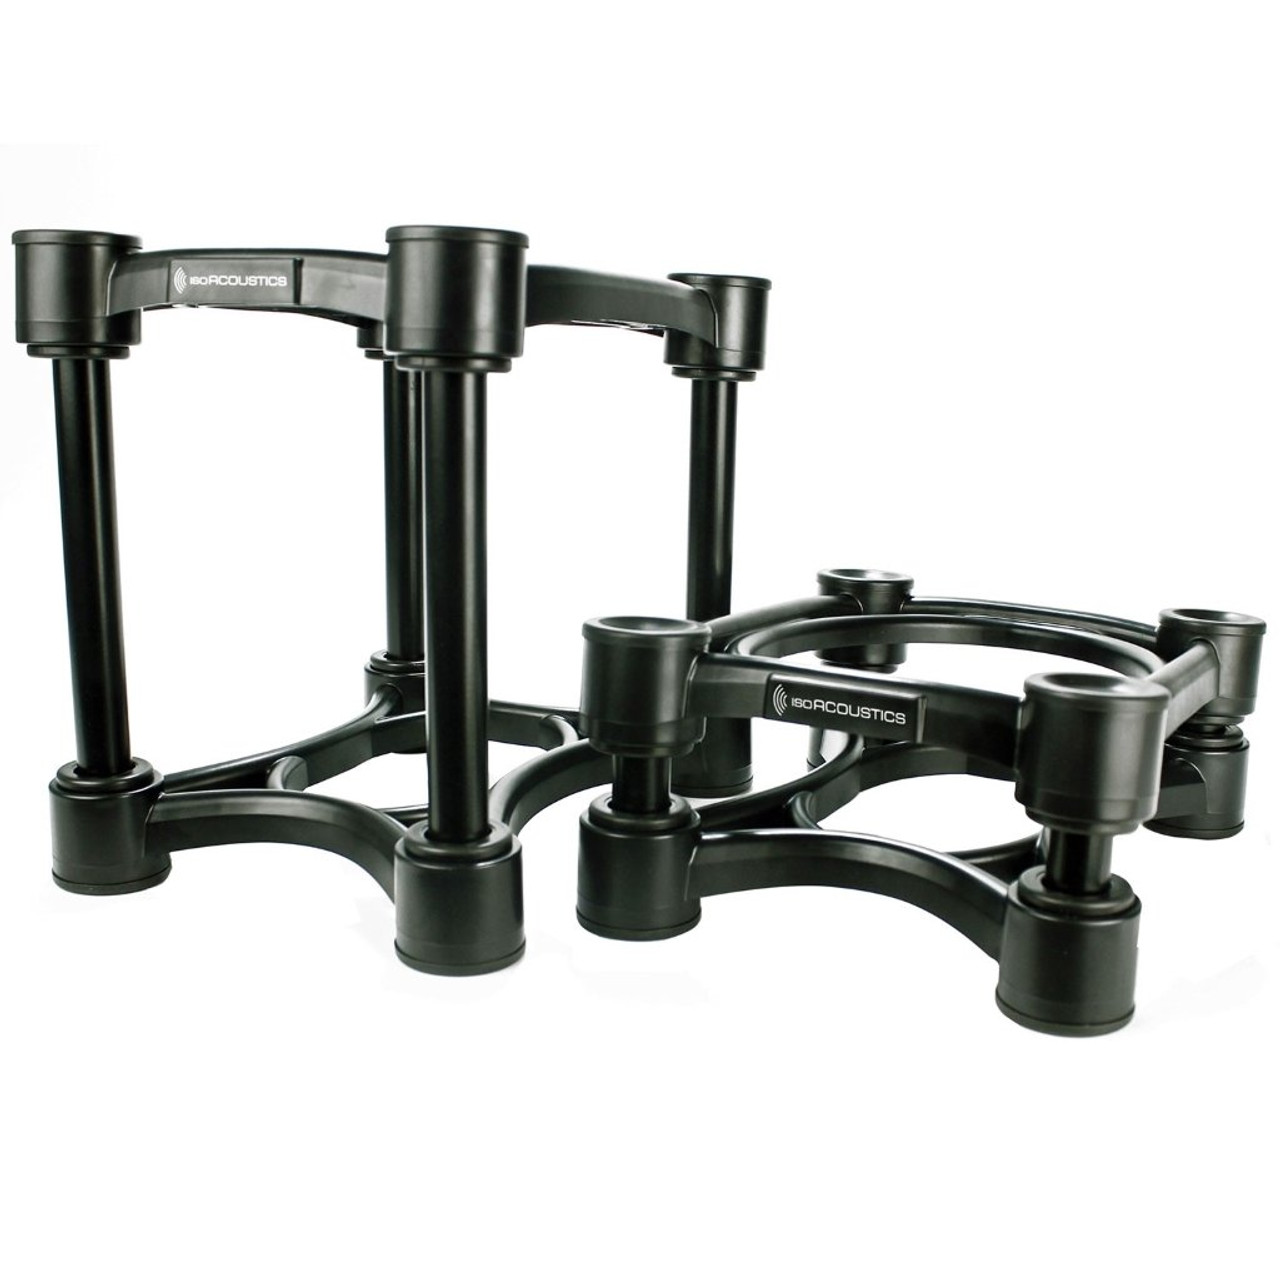 IsoAcoustics ISO-155 Isolation Speaker Stands (Pair)